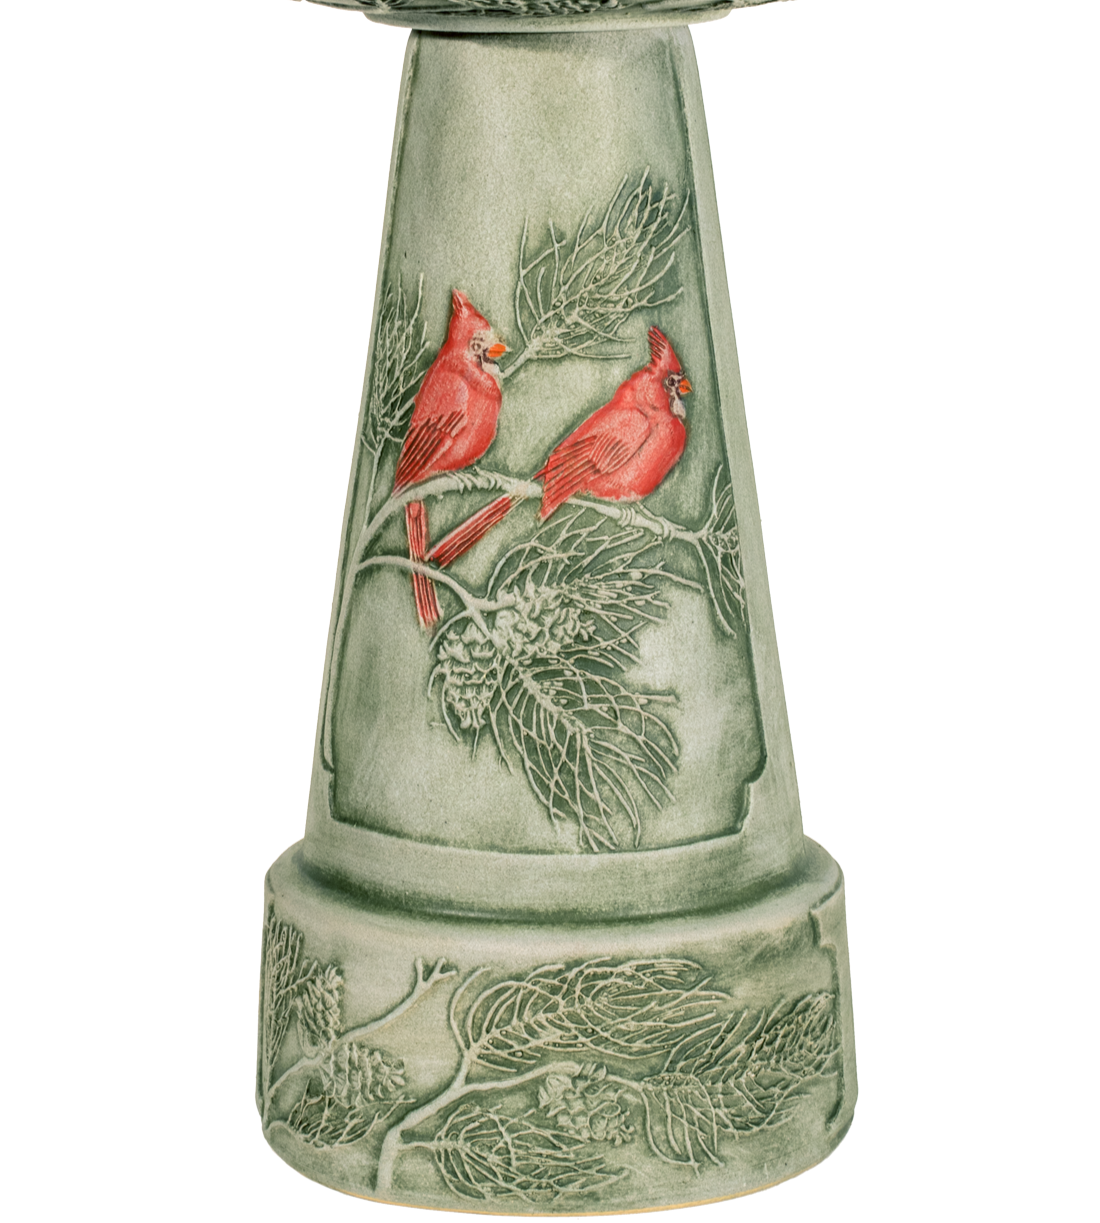 green aged birdbath pedestal with hand painted red cardinal birds and pine branches 